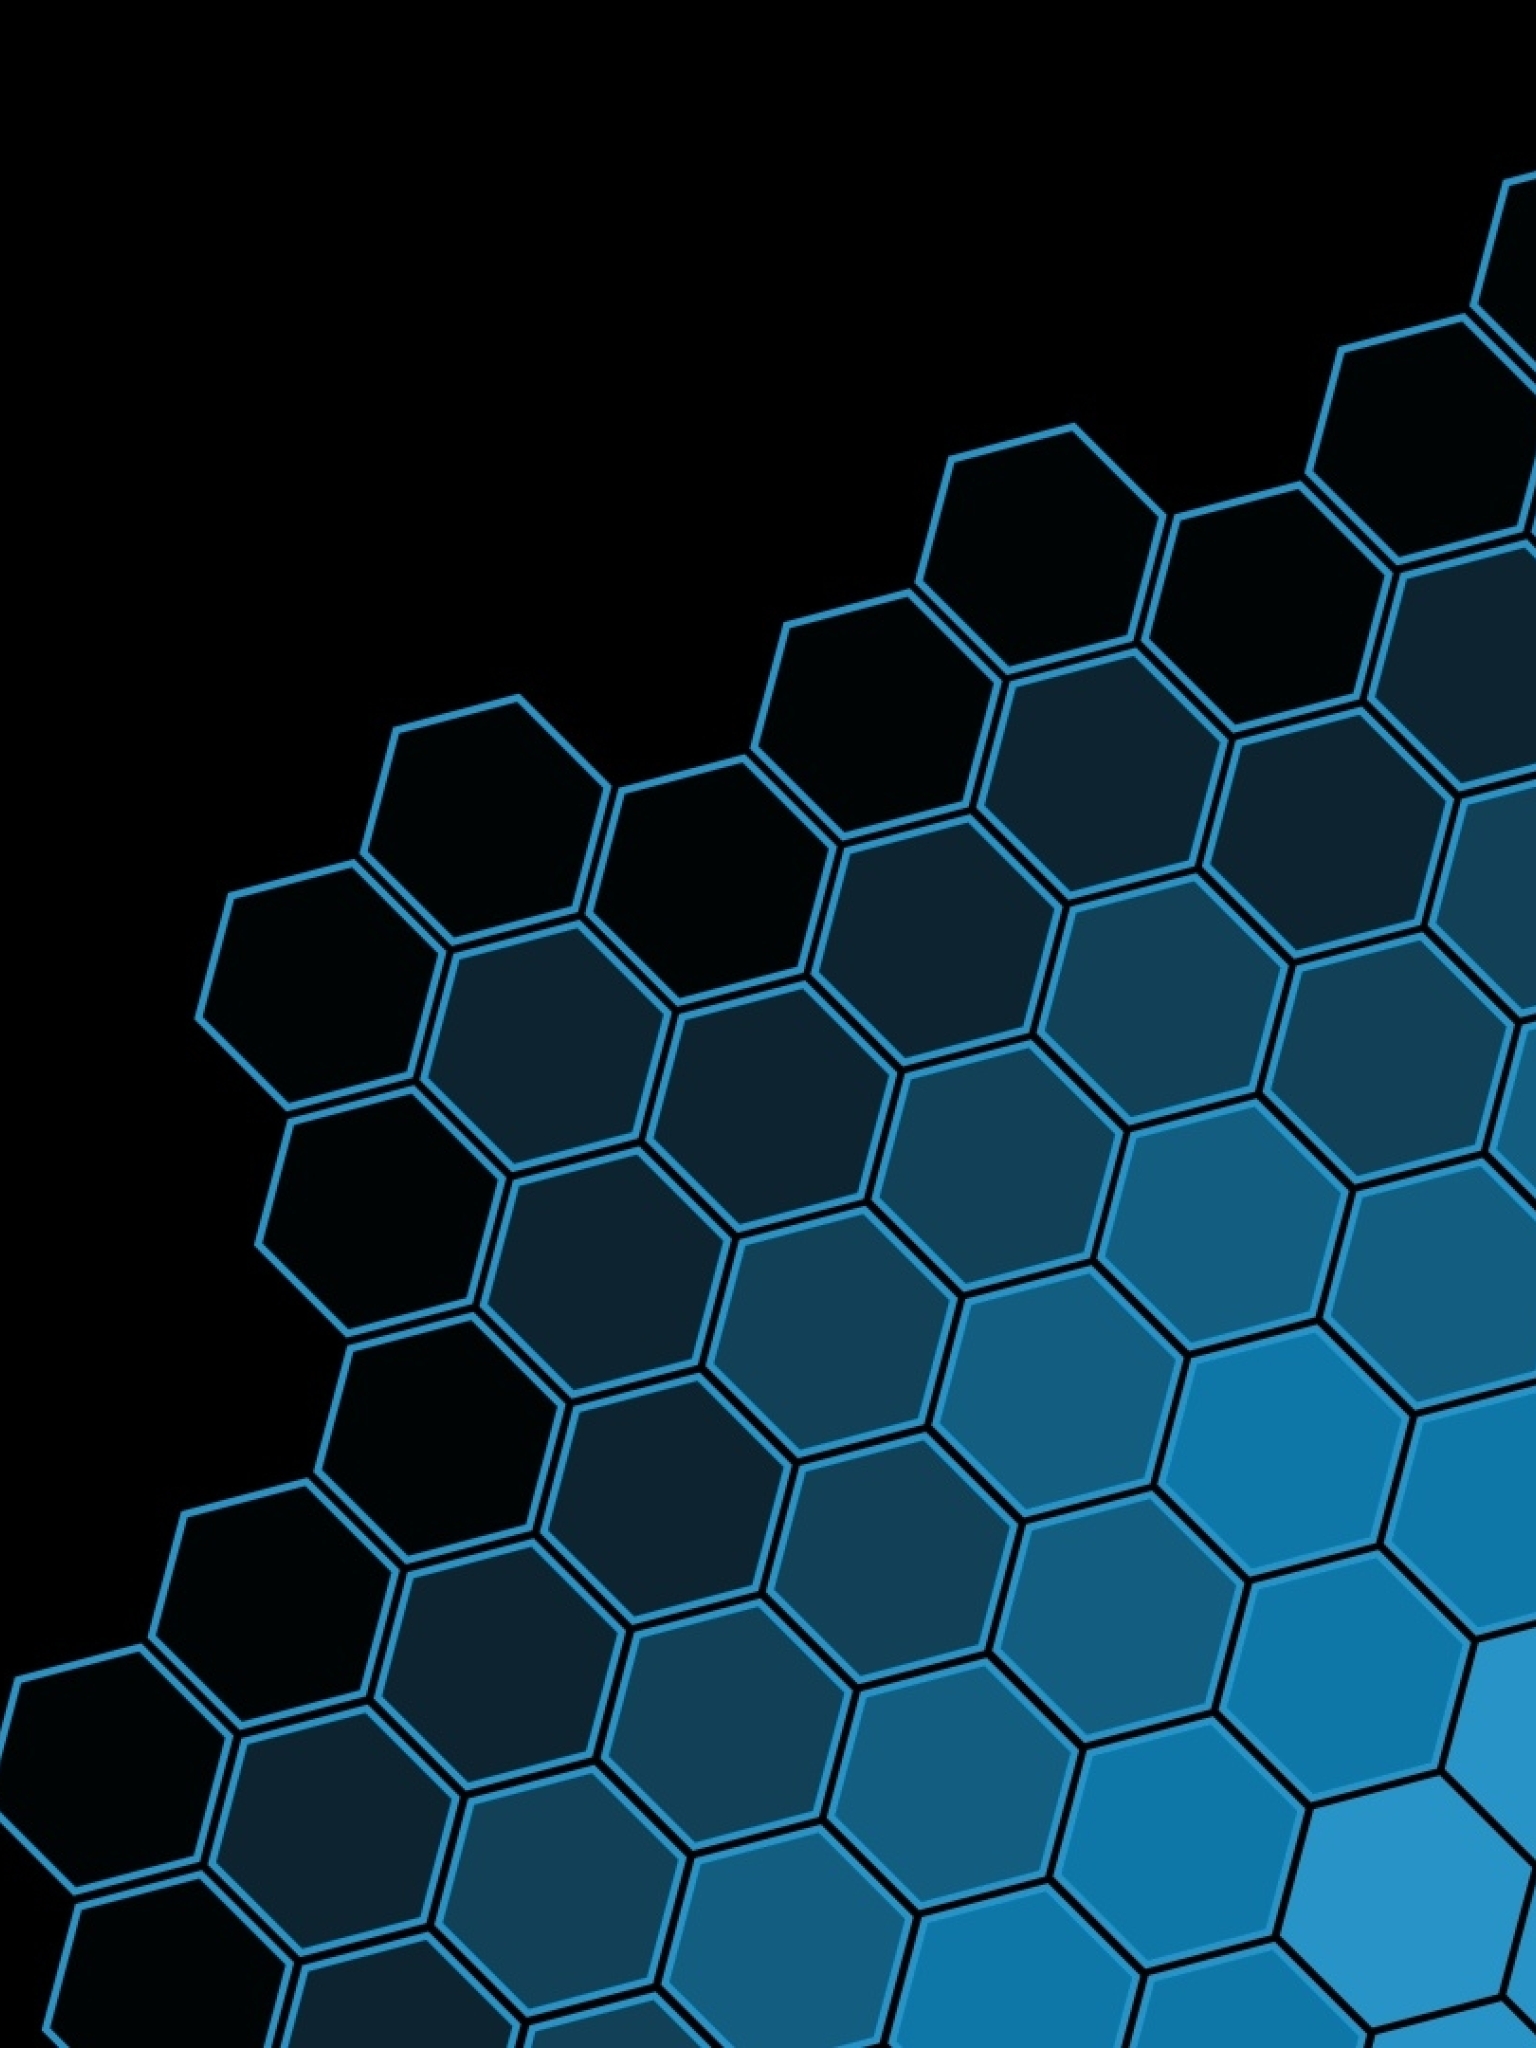 1536x48 Black Blue Hexagon Pattern 1536x48 Resolution Wallpaper Hd Abstract 4k Wallpapers Images Photos And Background